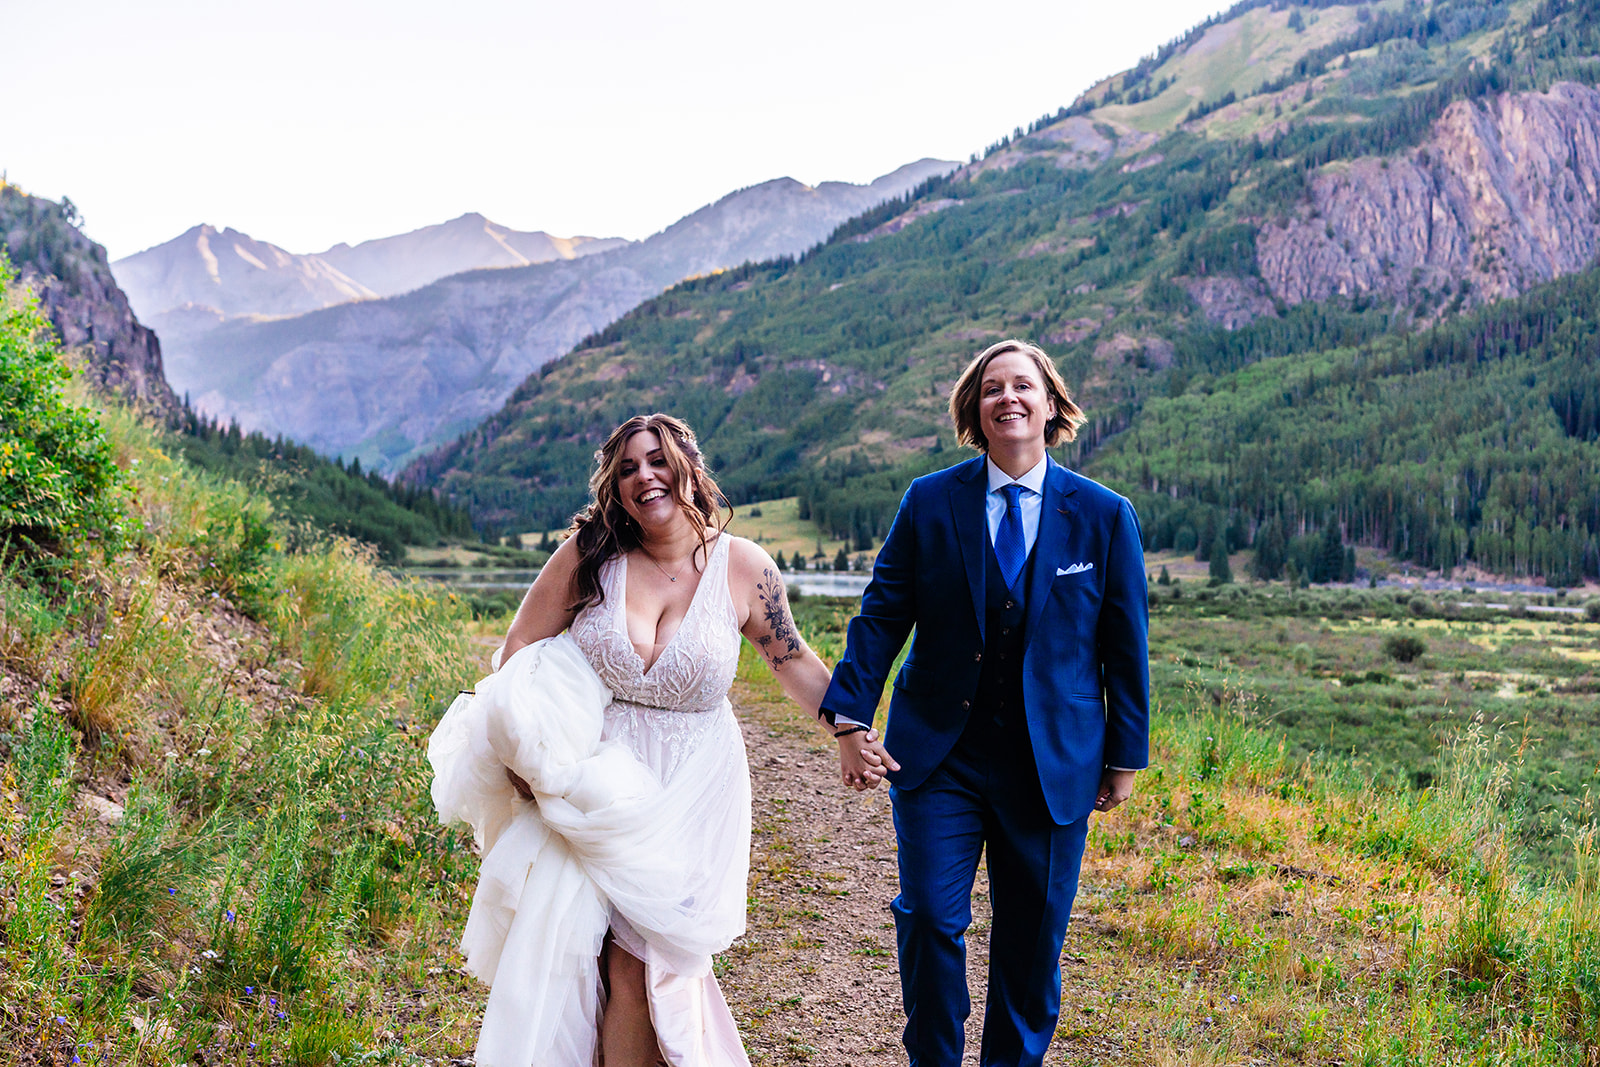 Beautiful lesbian couple smiling walking in Ouray Colorado